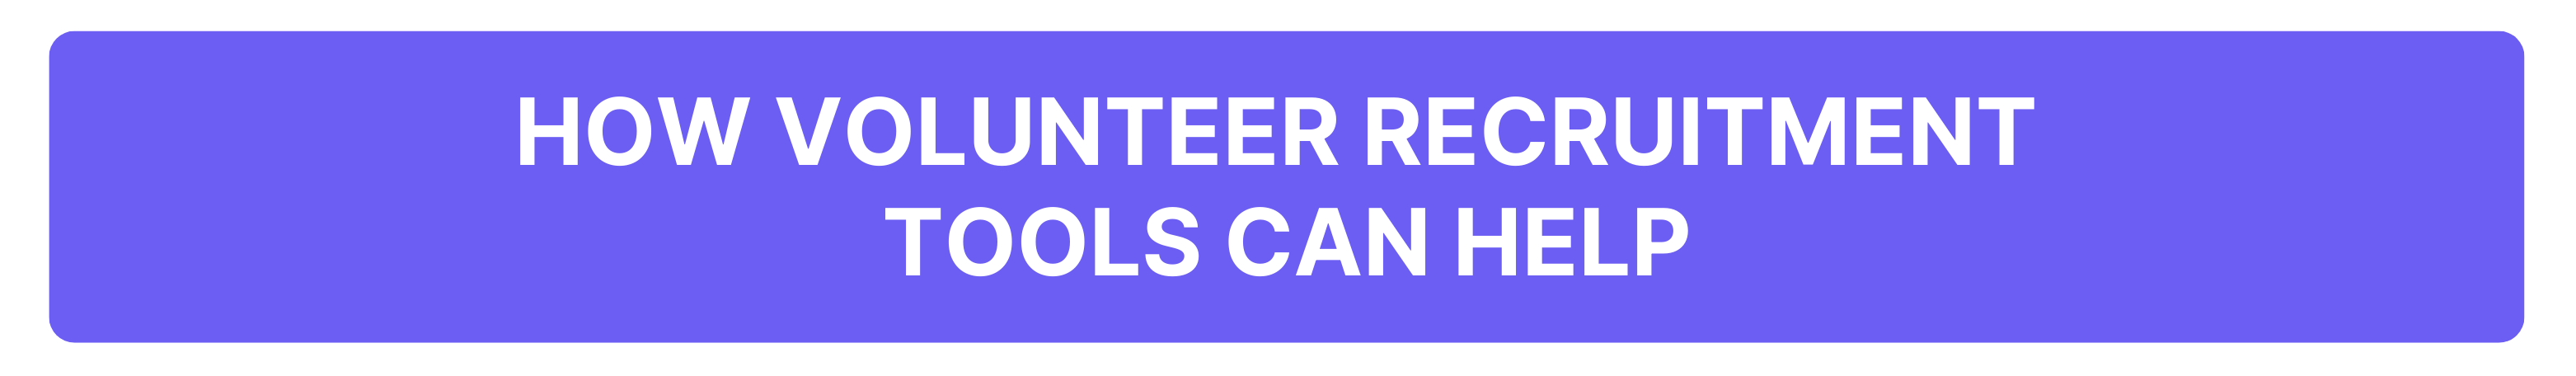 These volunteer recruitment tools can help streamline your process.